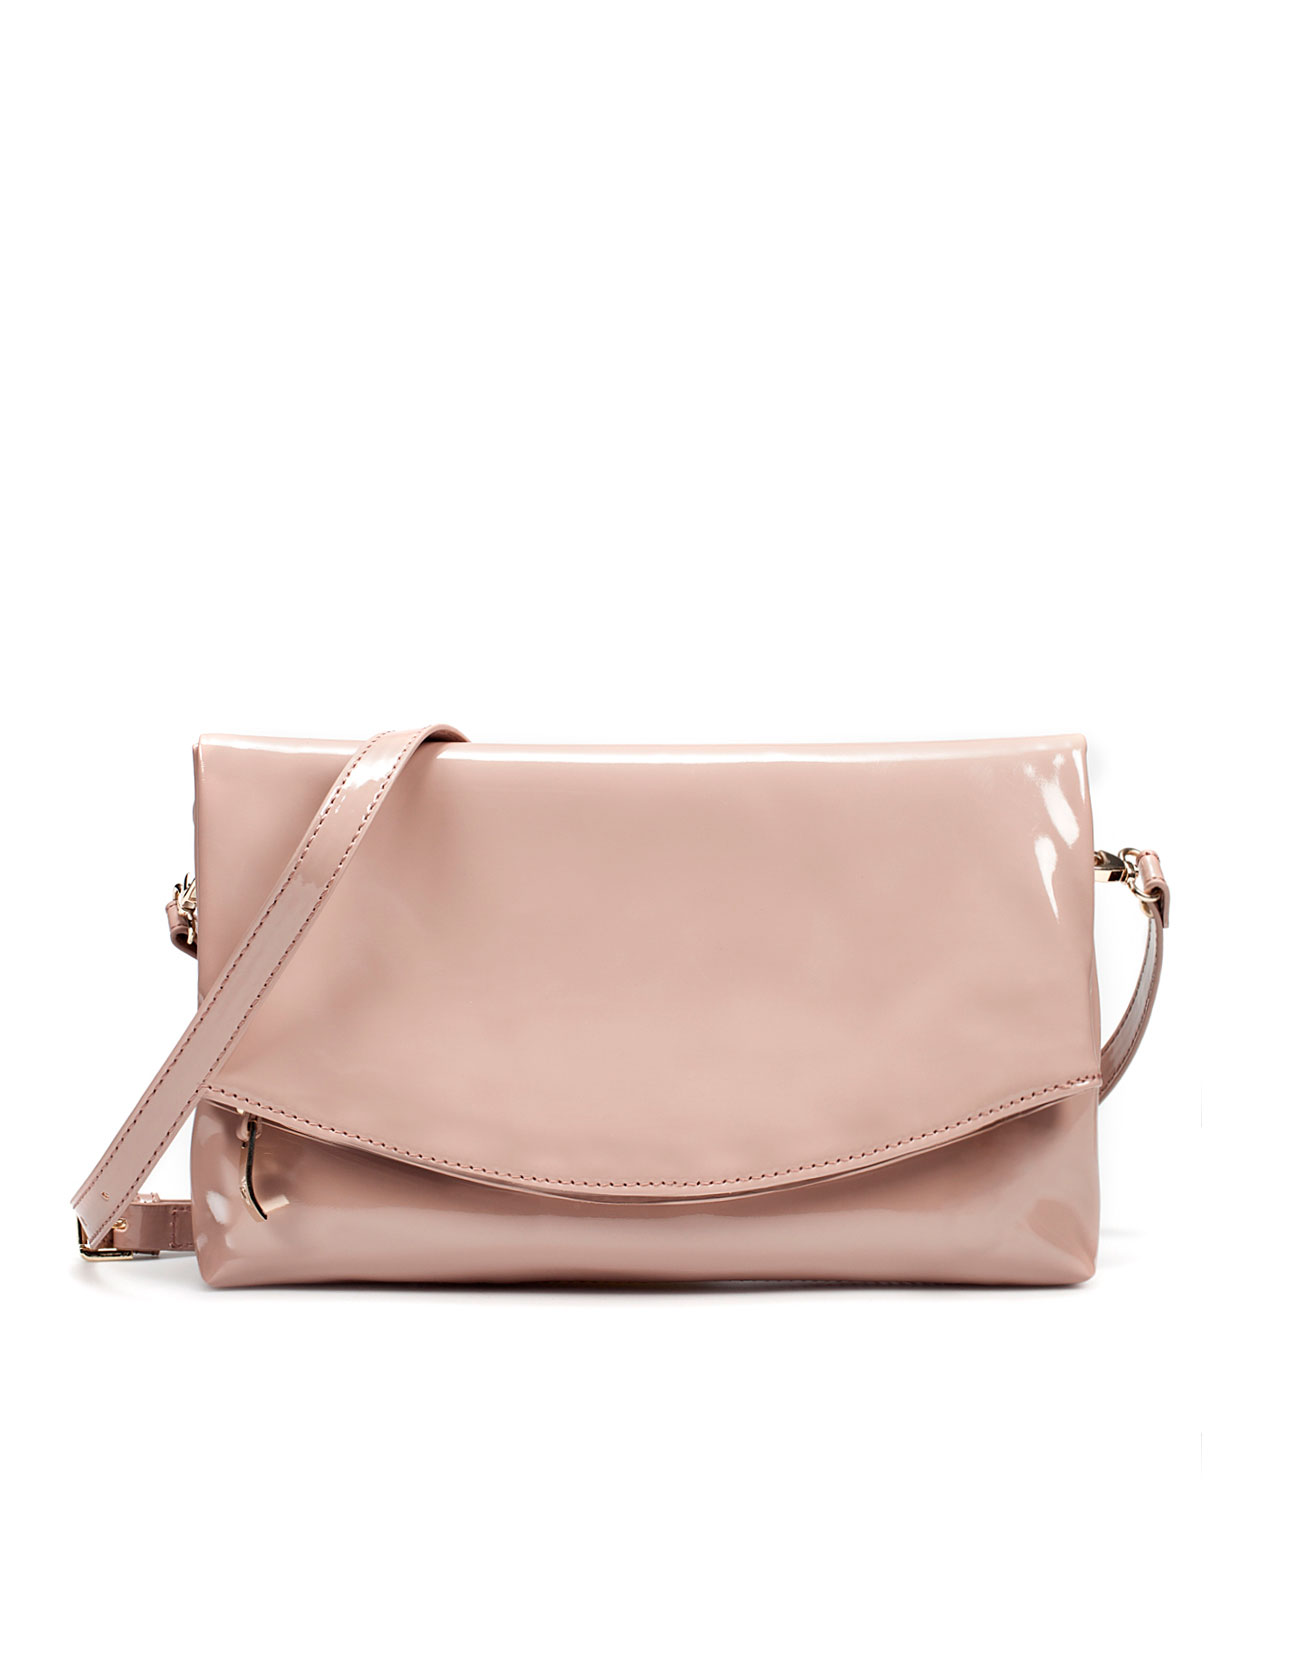 Zara Patent Leather Clutch Messenger Bag in Pink (nude) | Lyst